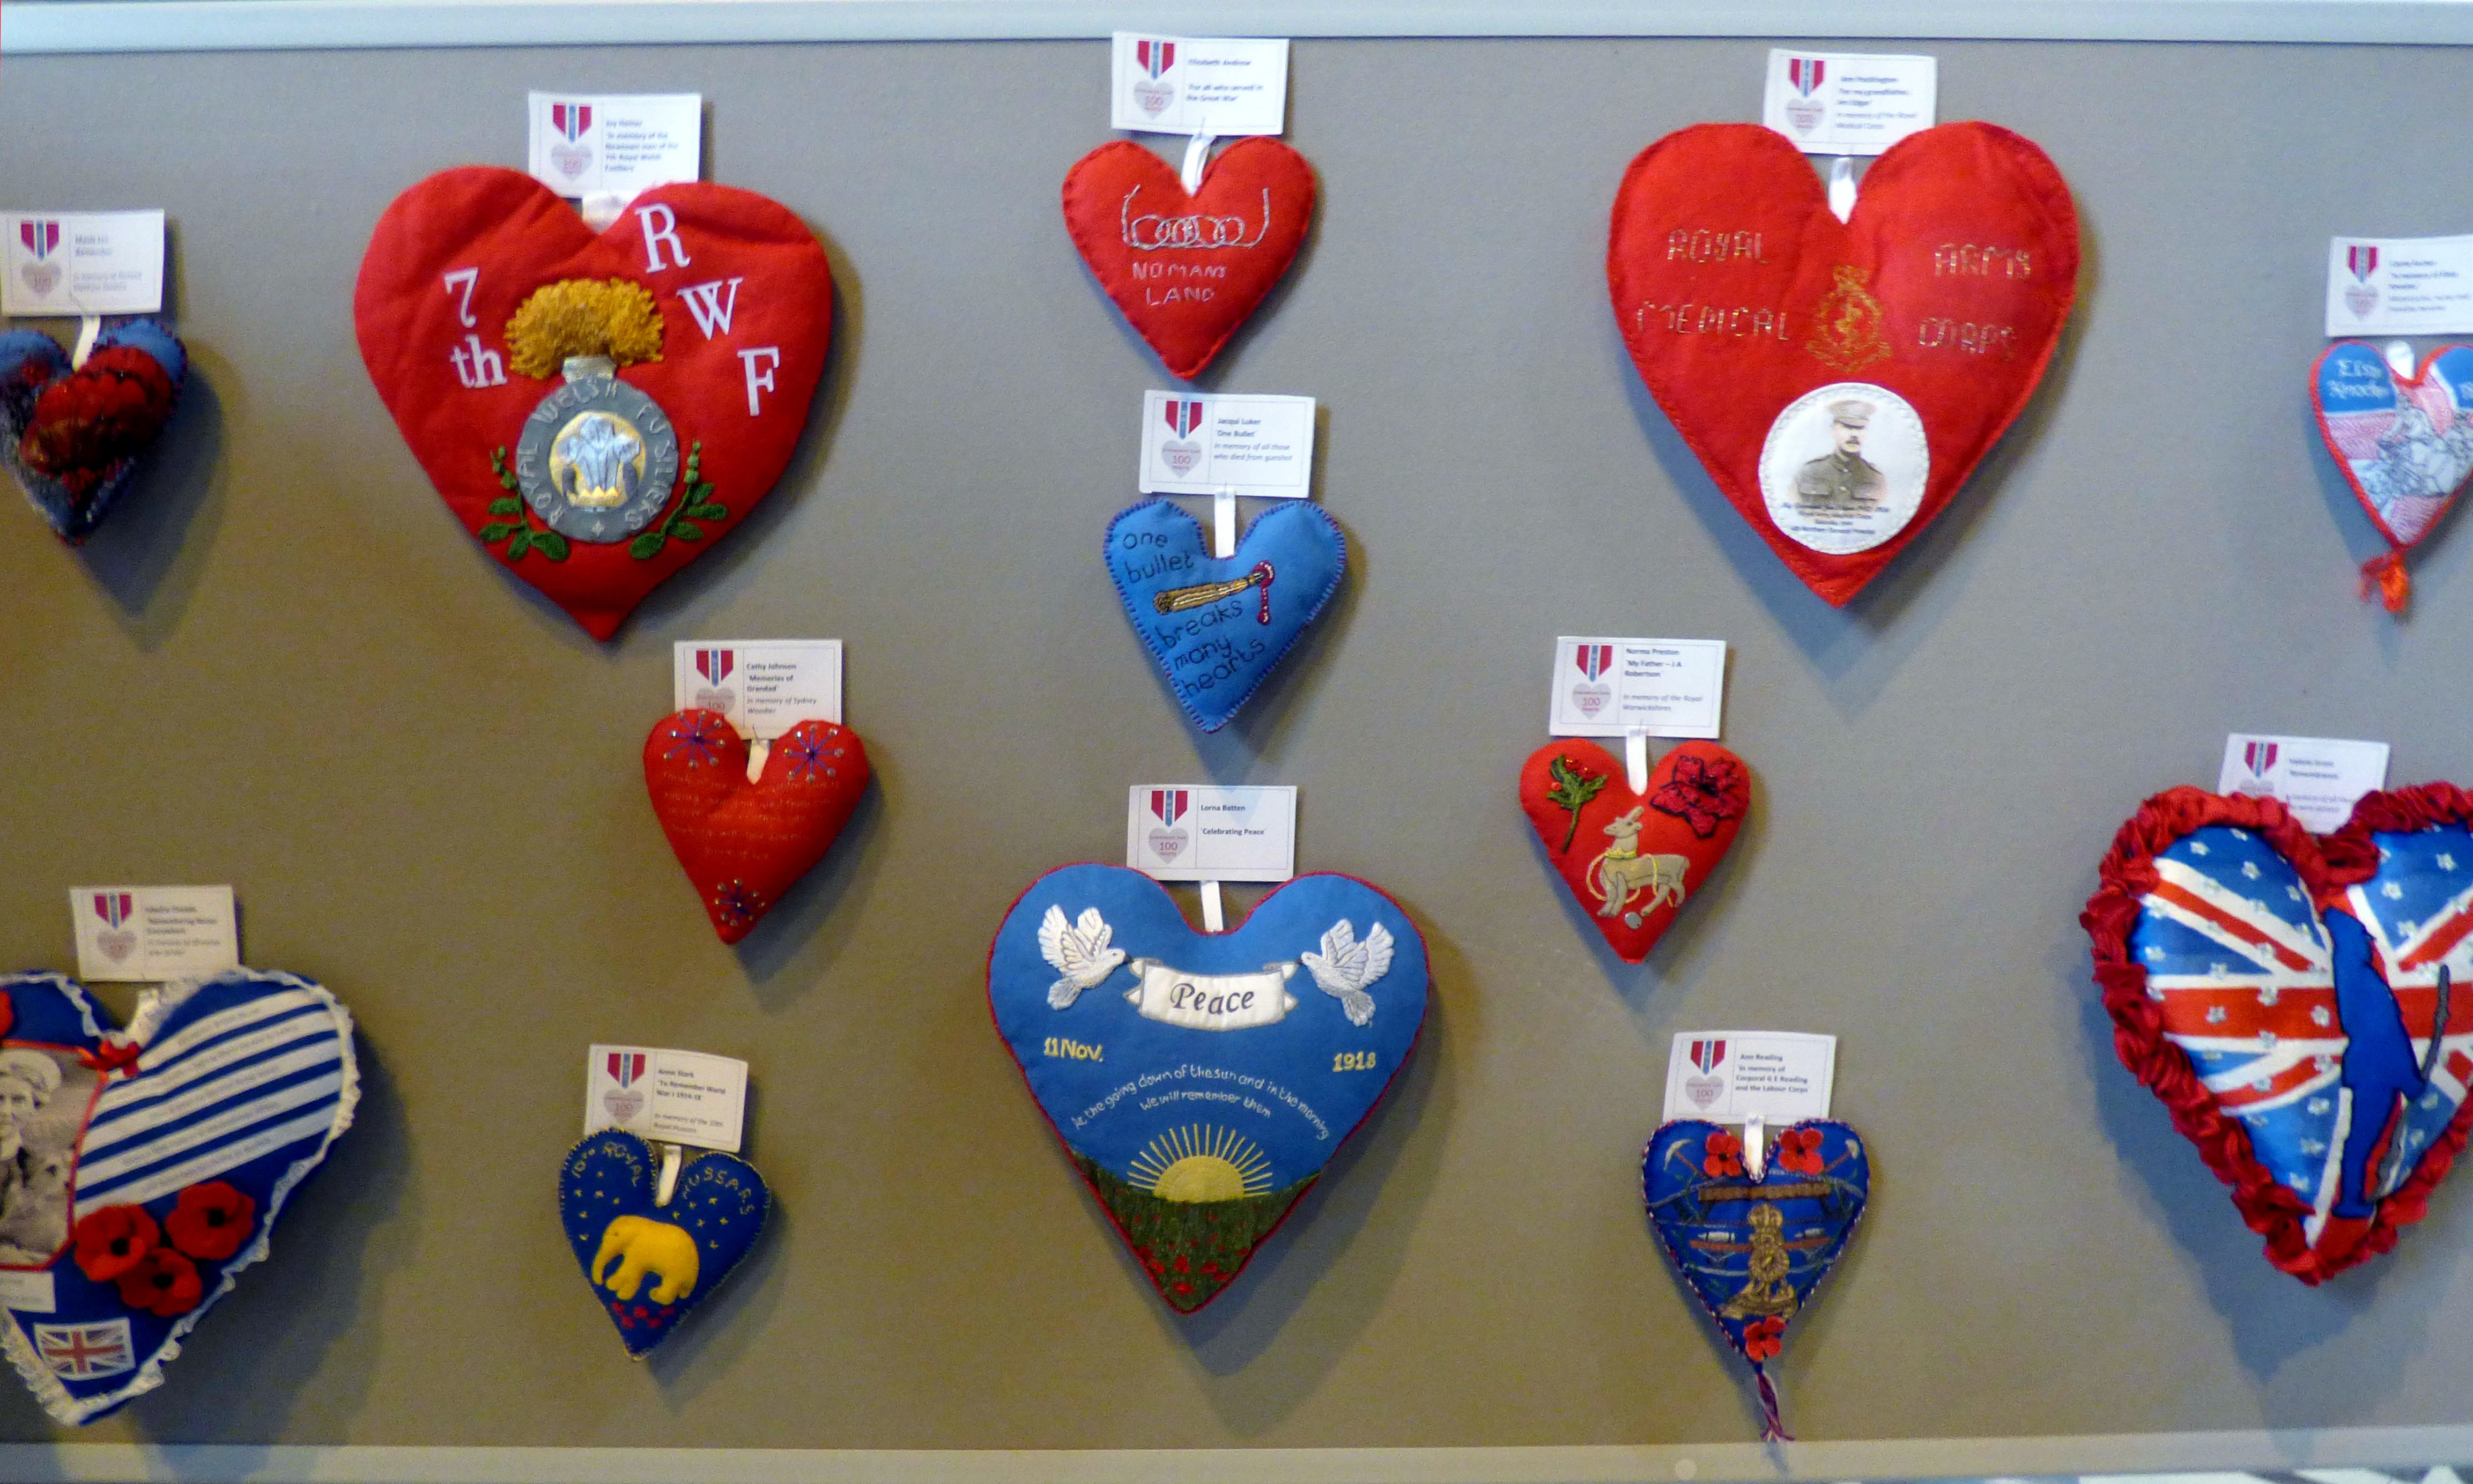 100 Hearts exhibition, Liverpool Cathedral, Sept 2018